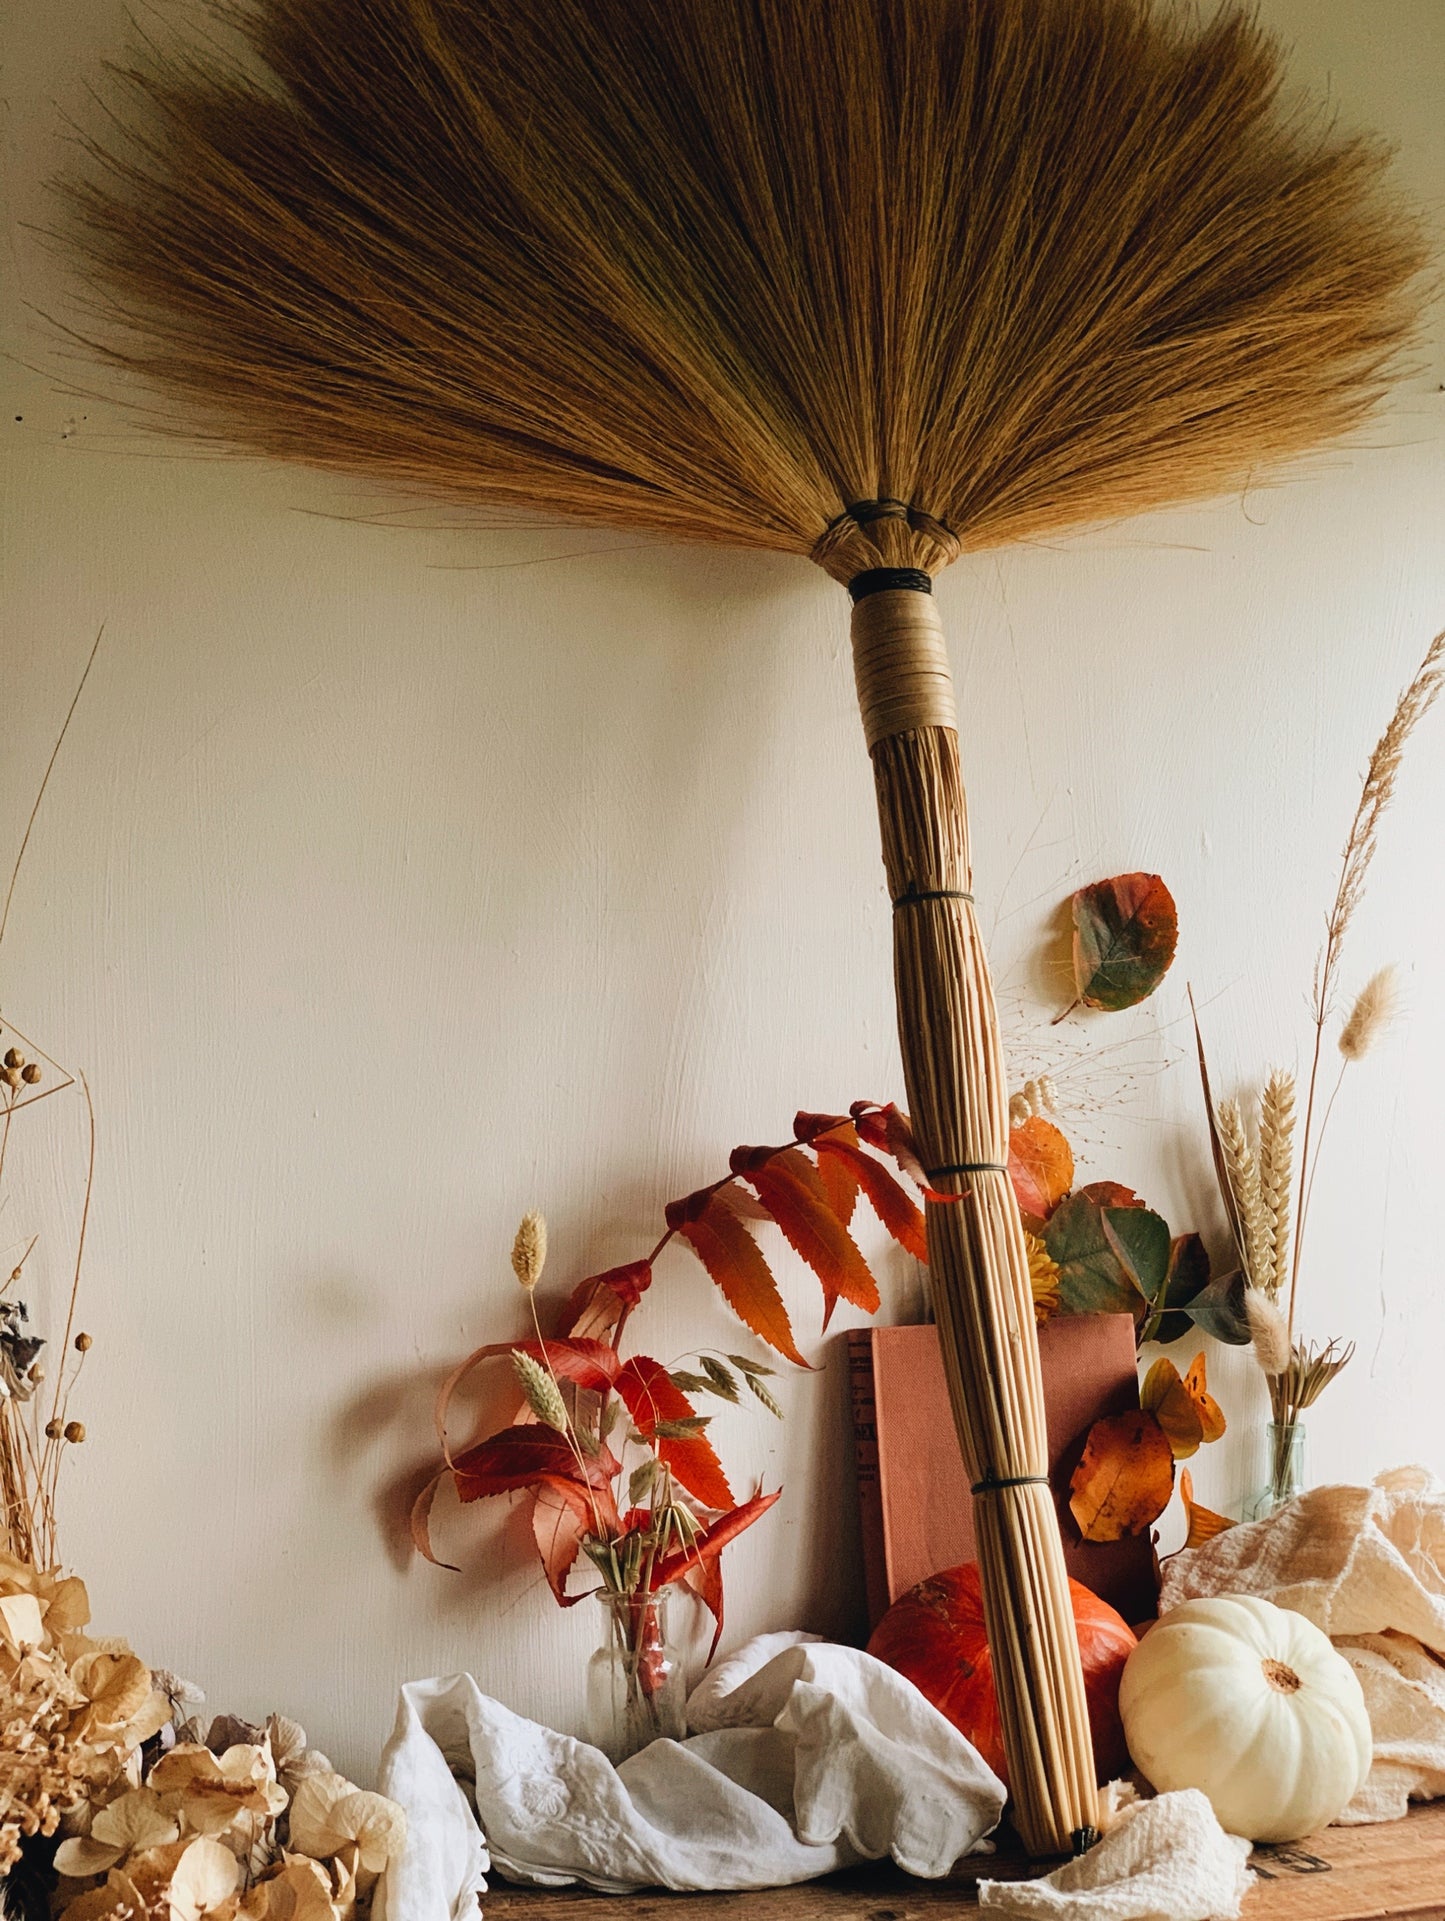 Large Eastern Wooden Handmade Broom (UK SHIPPING ONLY)